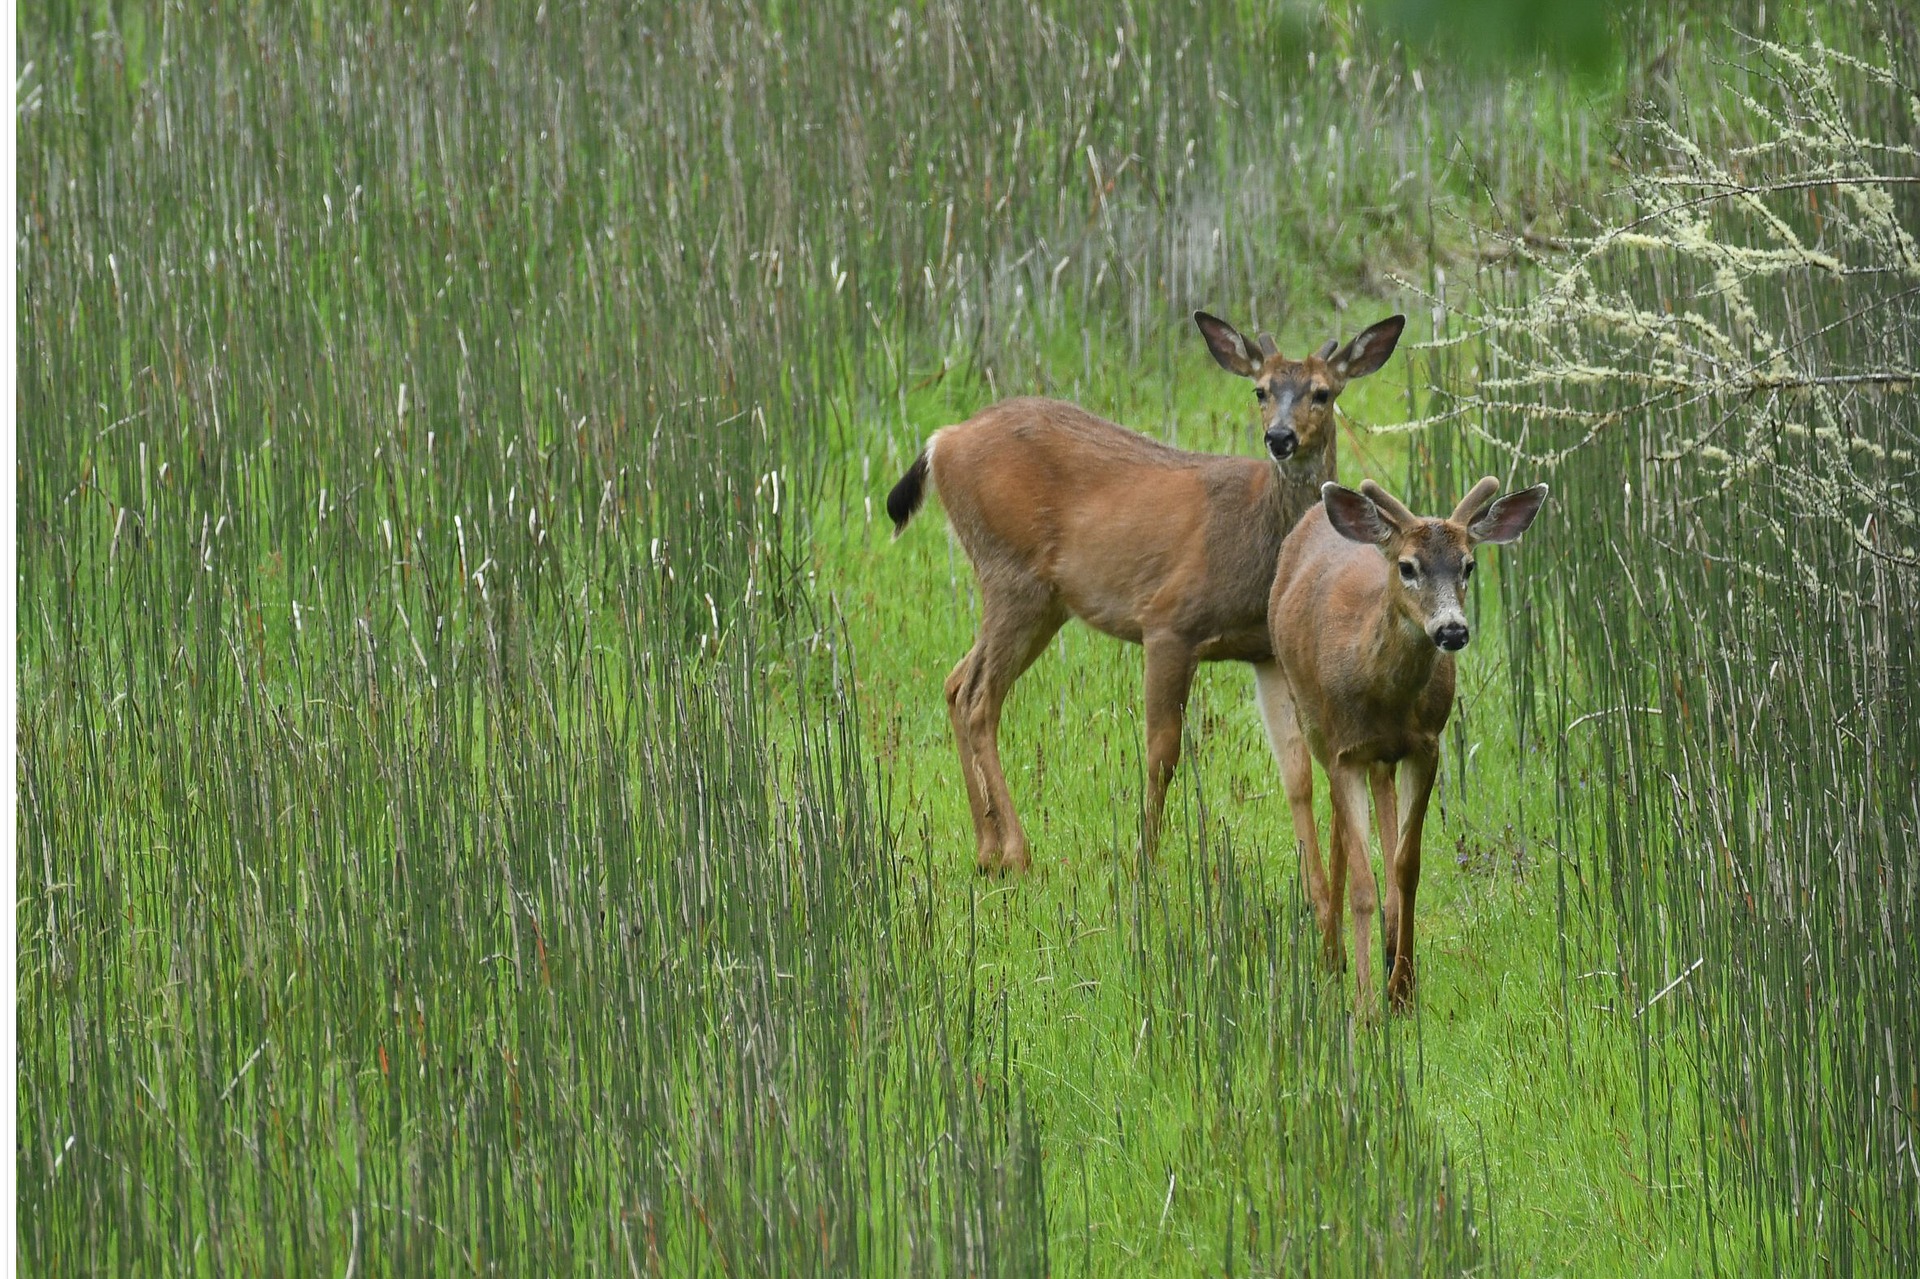 ...free-ranging deer were euthanized on the evening of July 26 in Ridgway T...